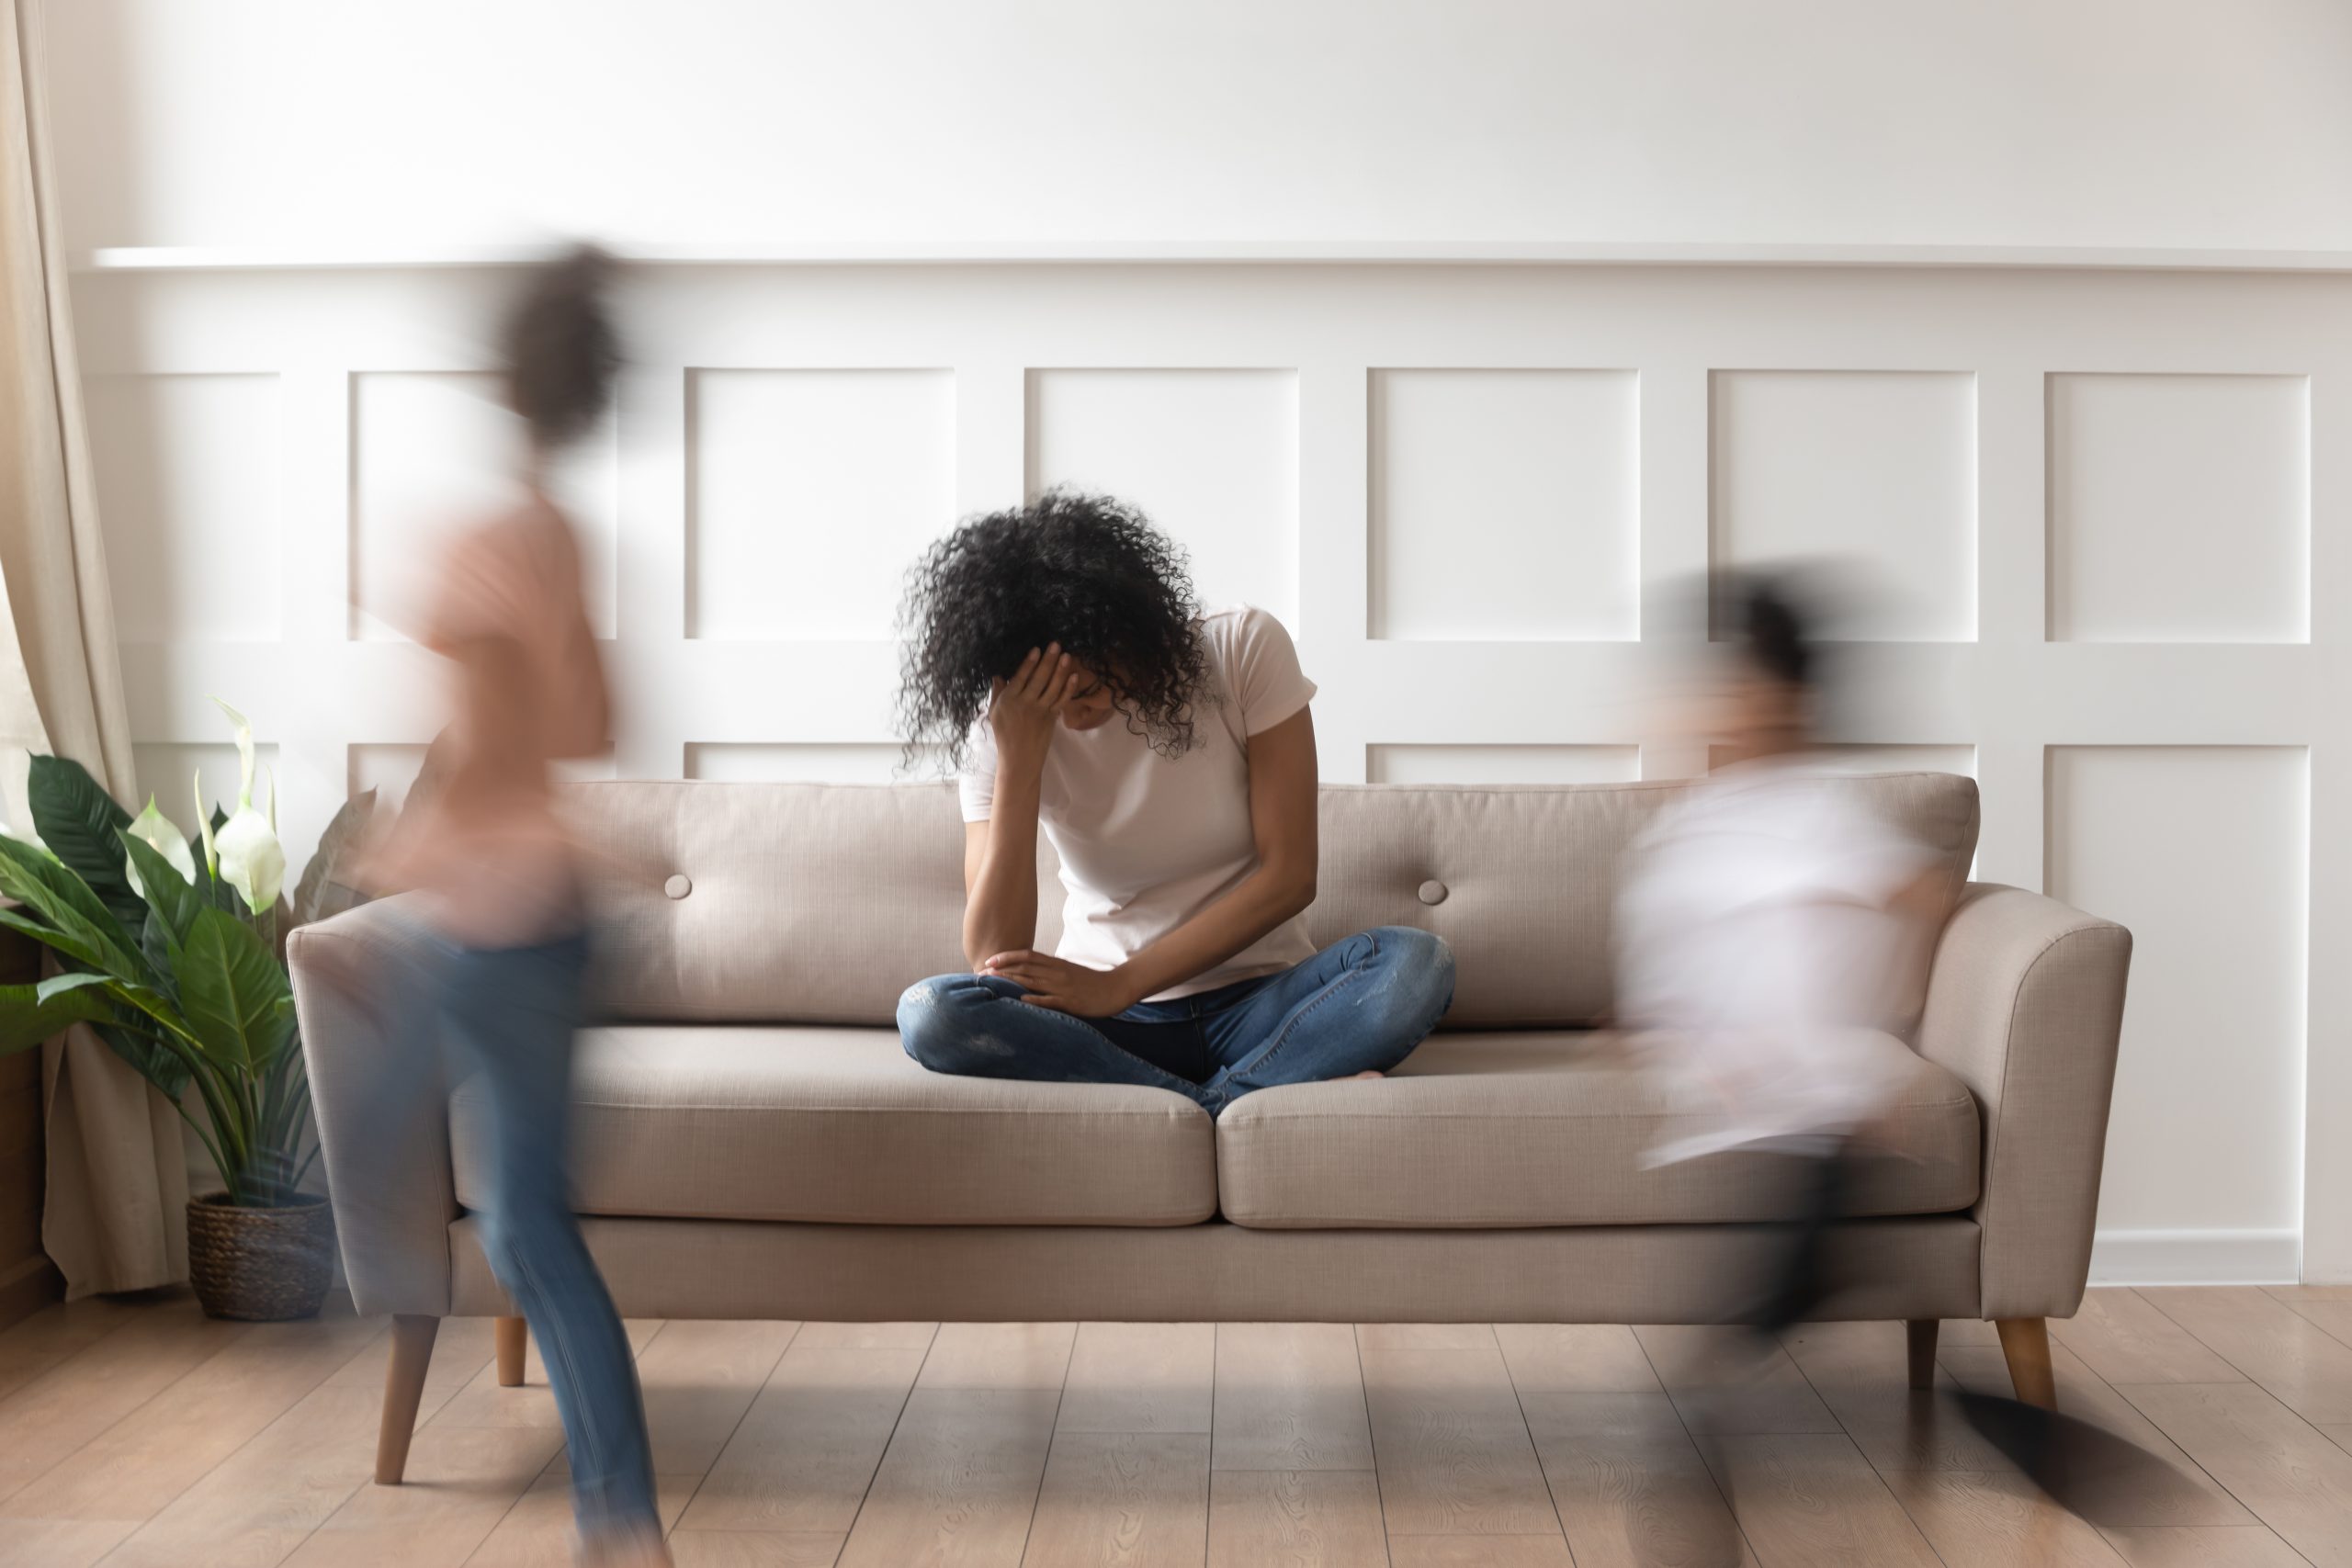 A person sits on a beige couch with their head in their hand, looking distressed. Two children are seen in motion, one on each side of the couch, creating a blur as they run by. The background shows a white paneled wall and a plant in the corner, subtly reminiscent of Khiron Clinics' calming environments.